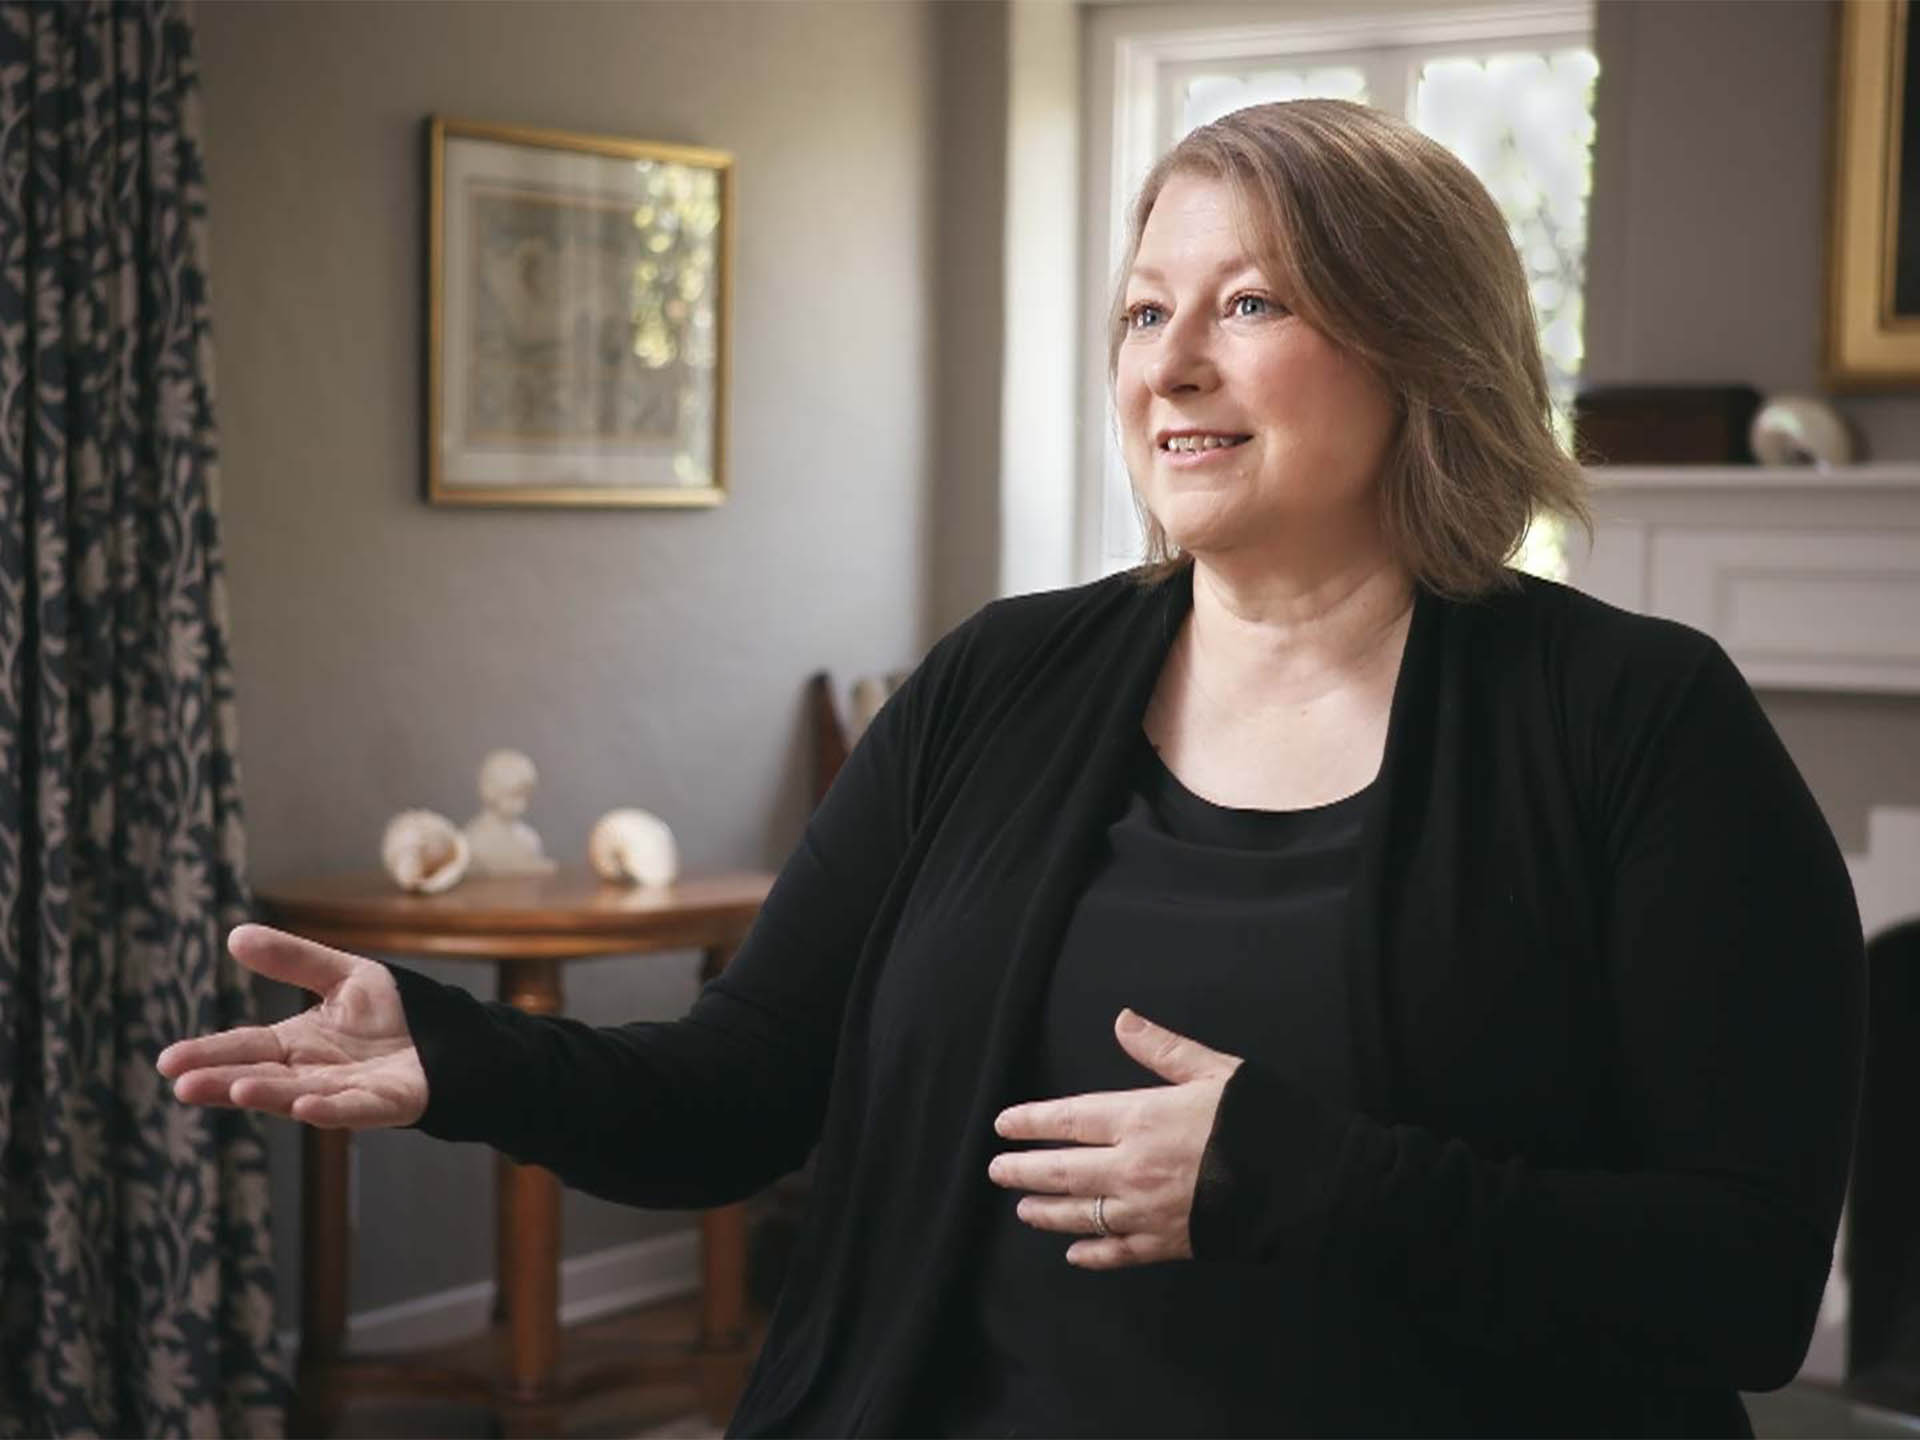 A Discovery of Witches: Author's Notes With Deborah Harkness Season 1 Episode 1 - Bringing the Book to Life